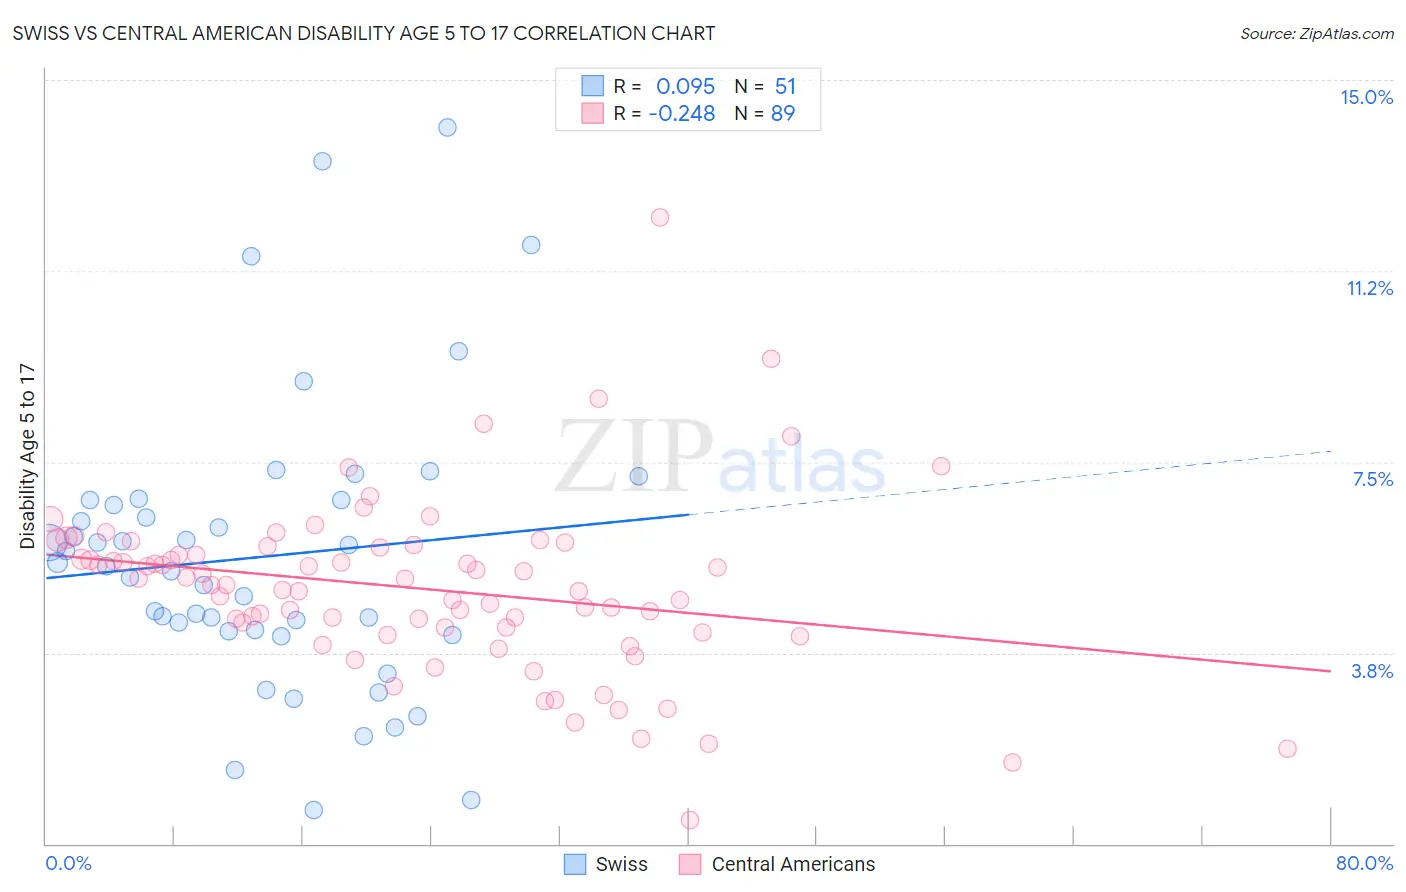 Swiss vs Central American Disability Age 5 to 17